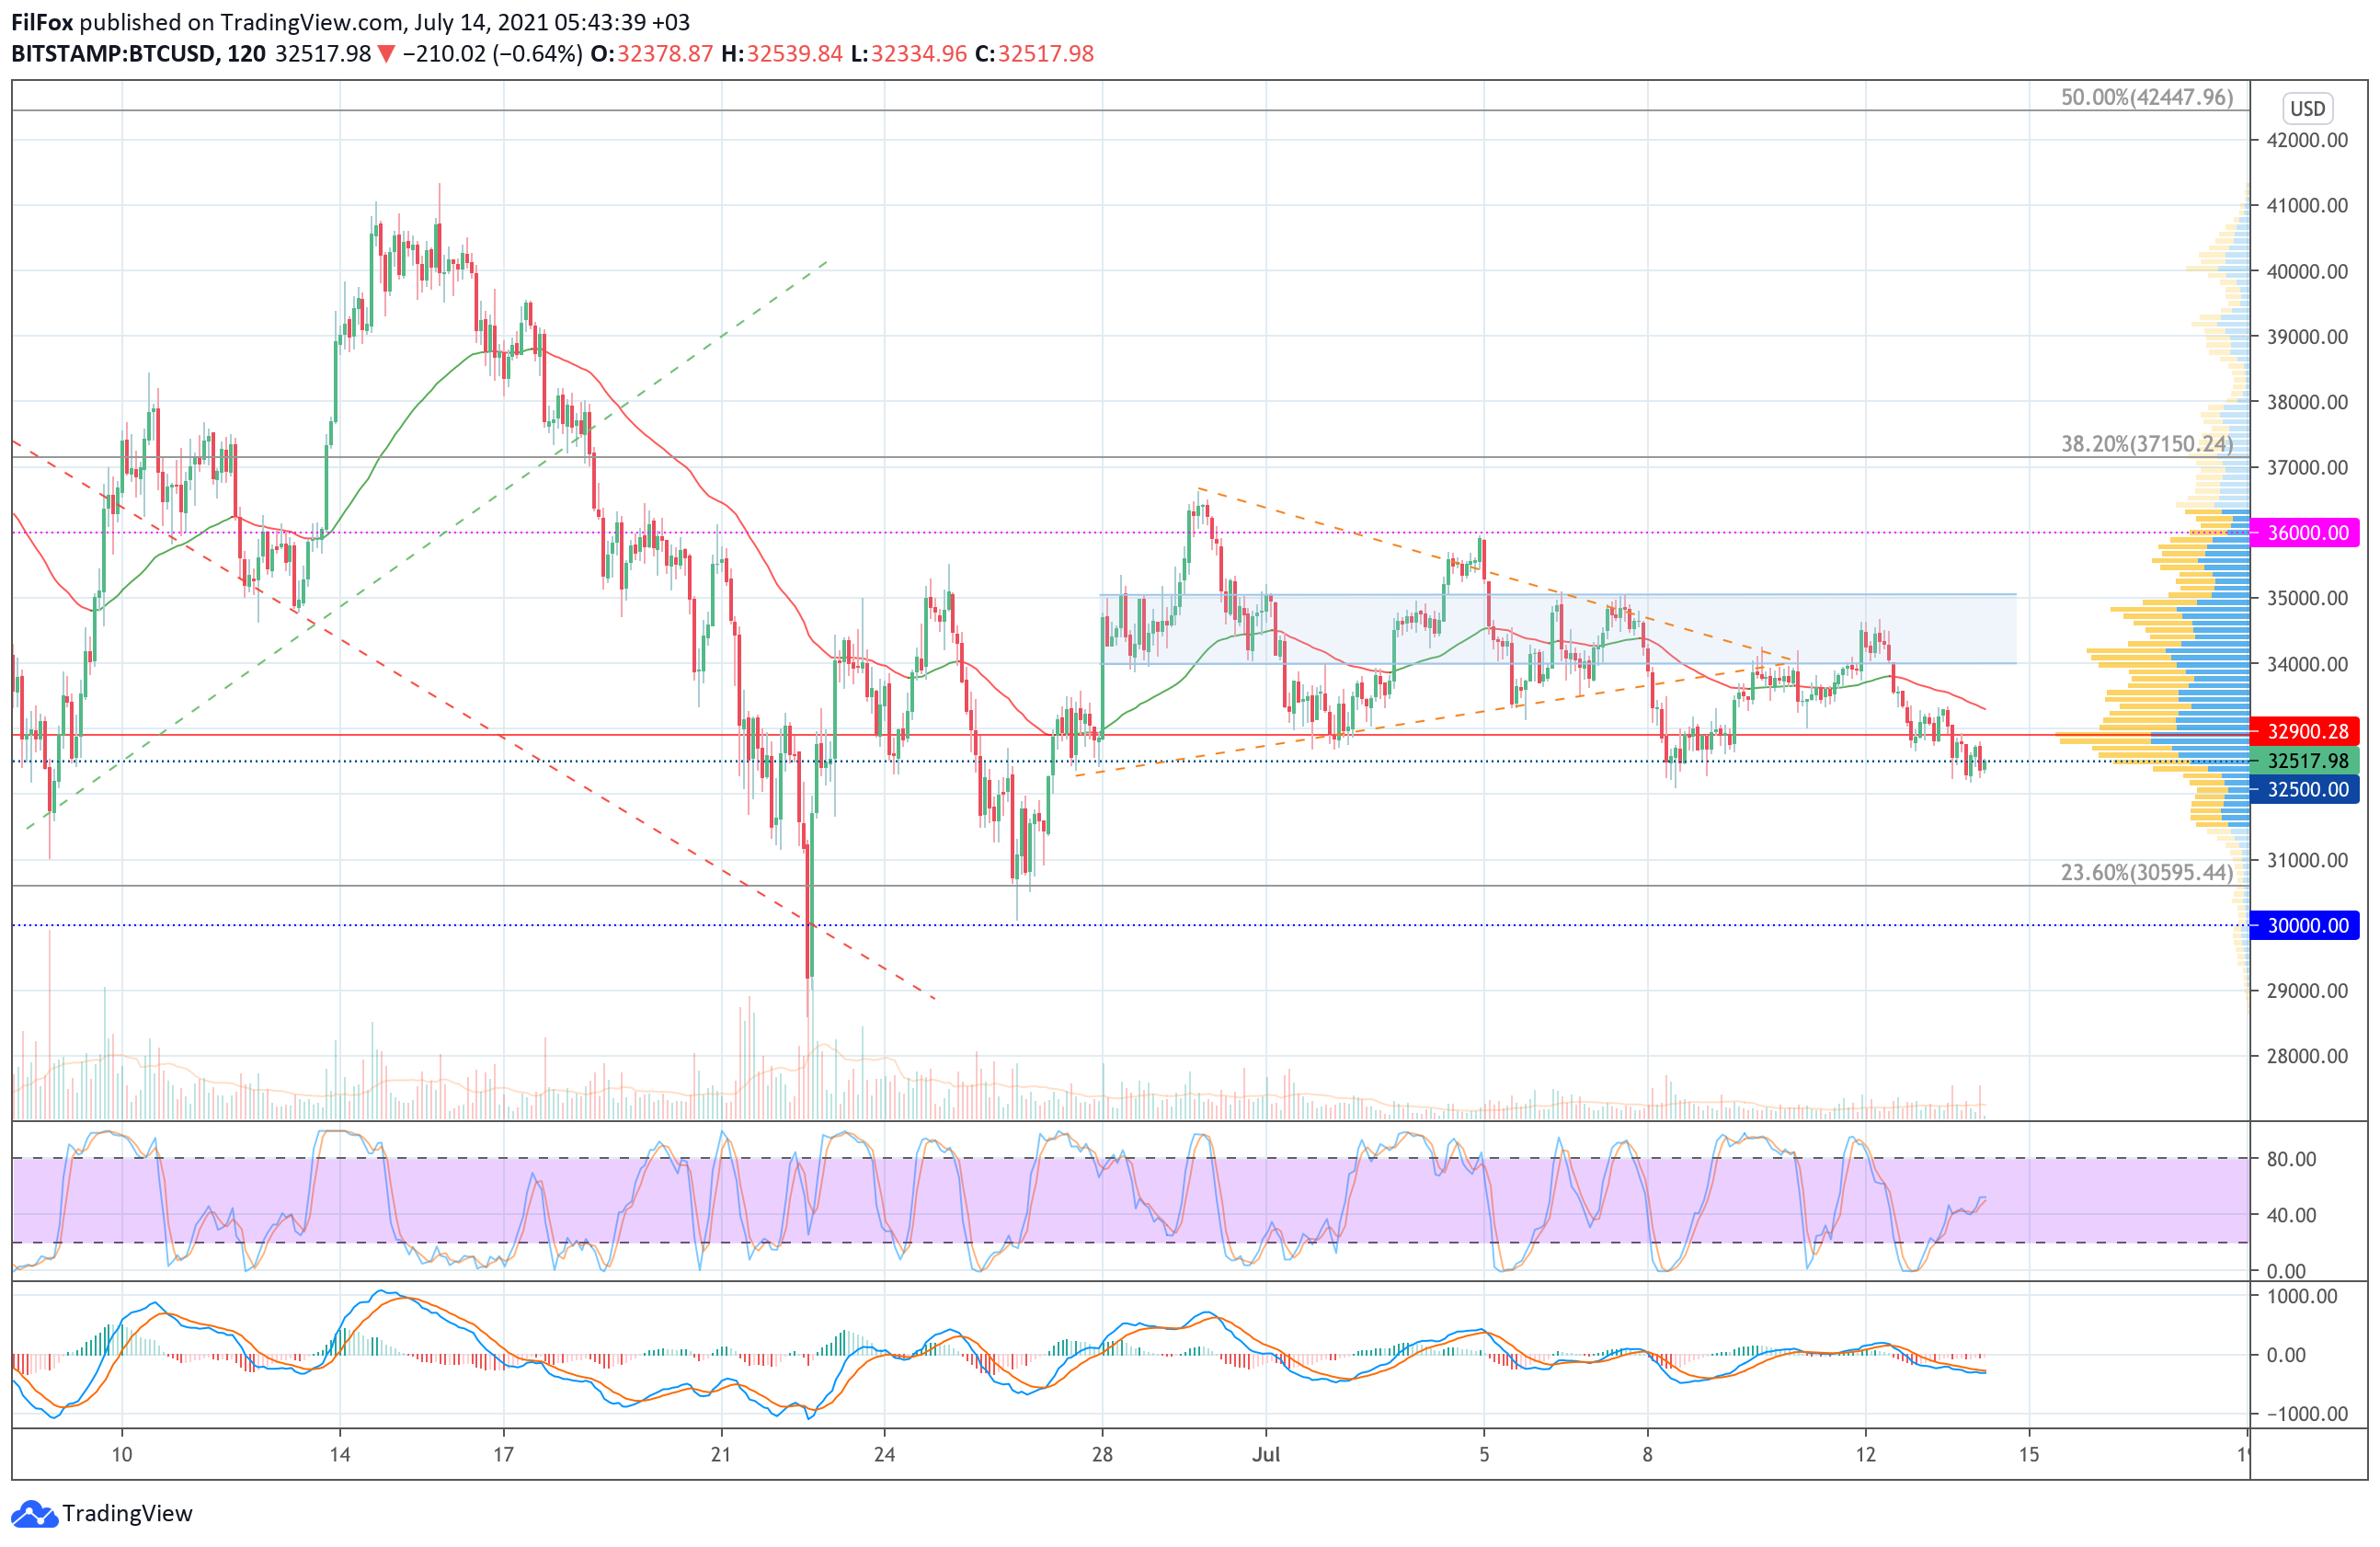 Analysis of the prices of Bitcoin, Ethereum, XRP for 07/14/2021